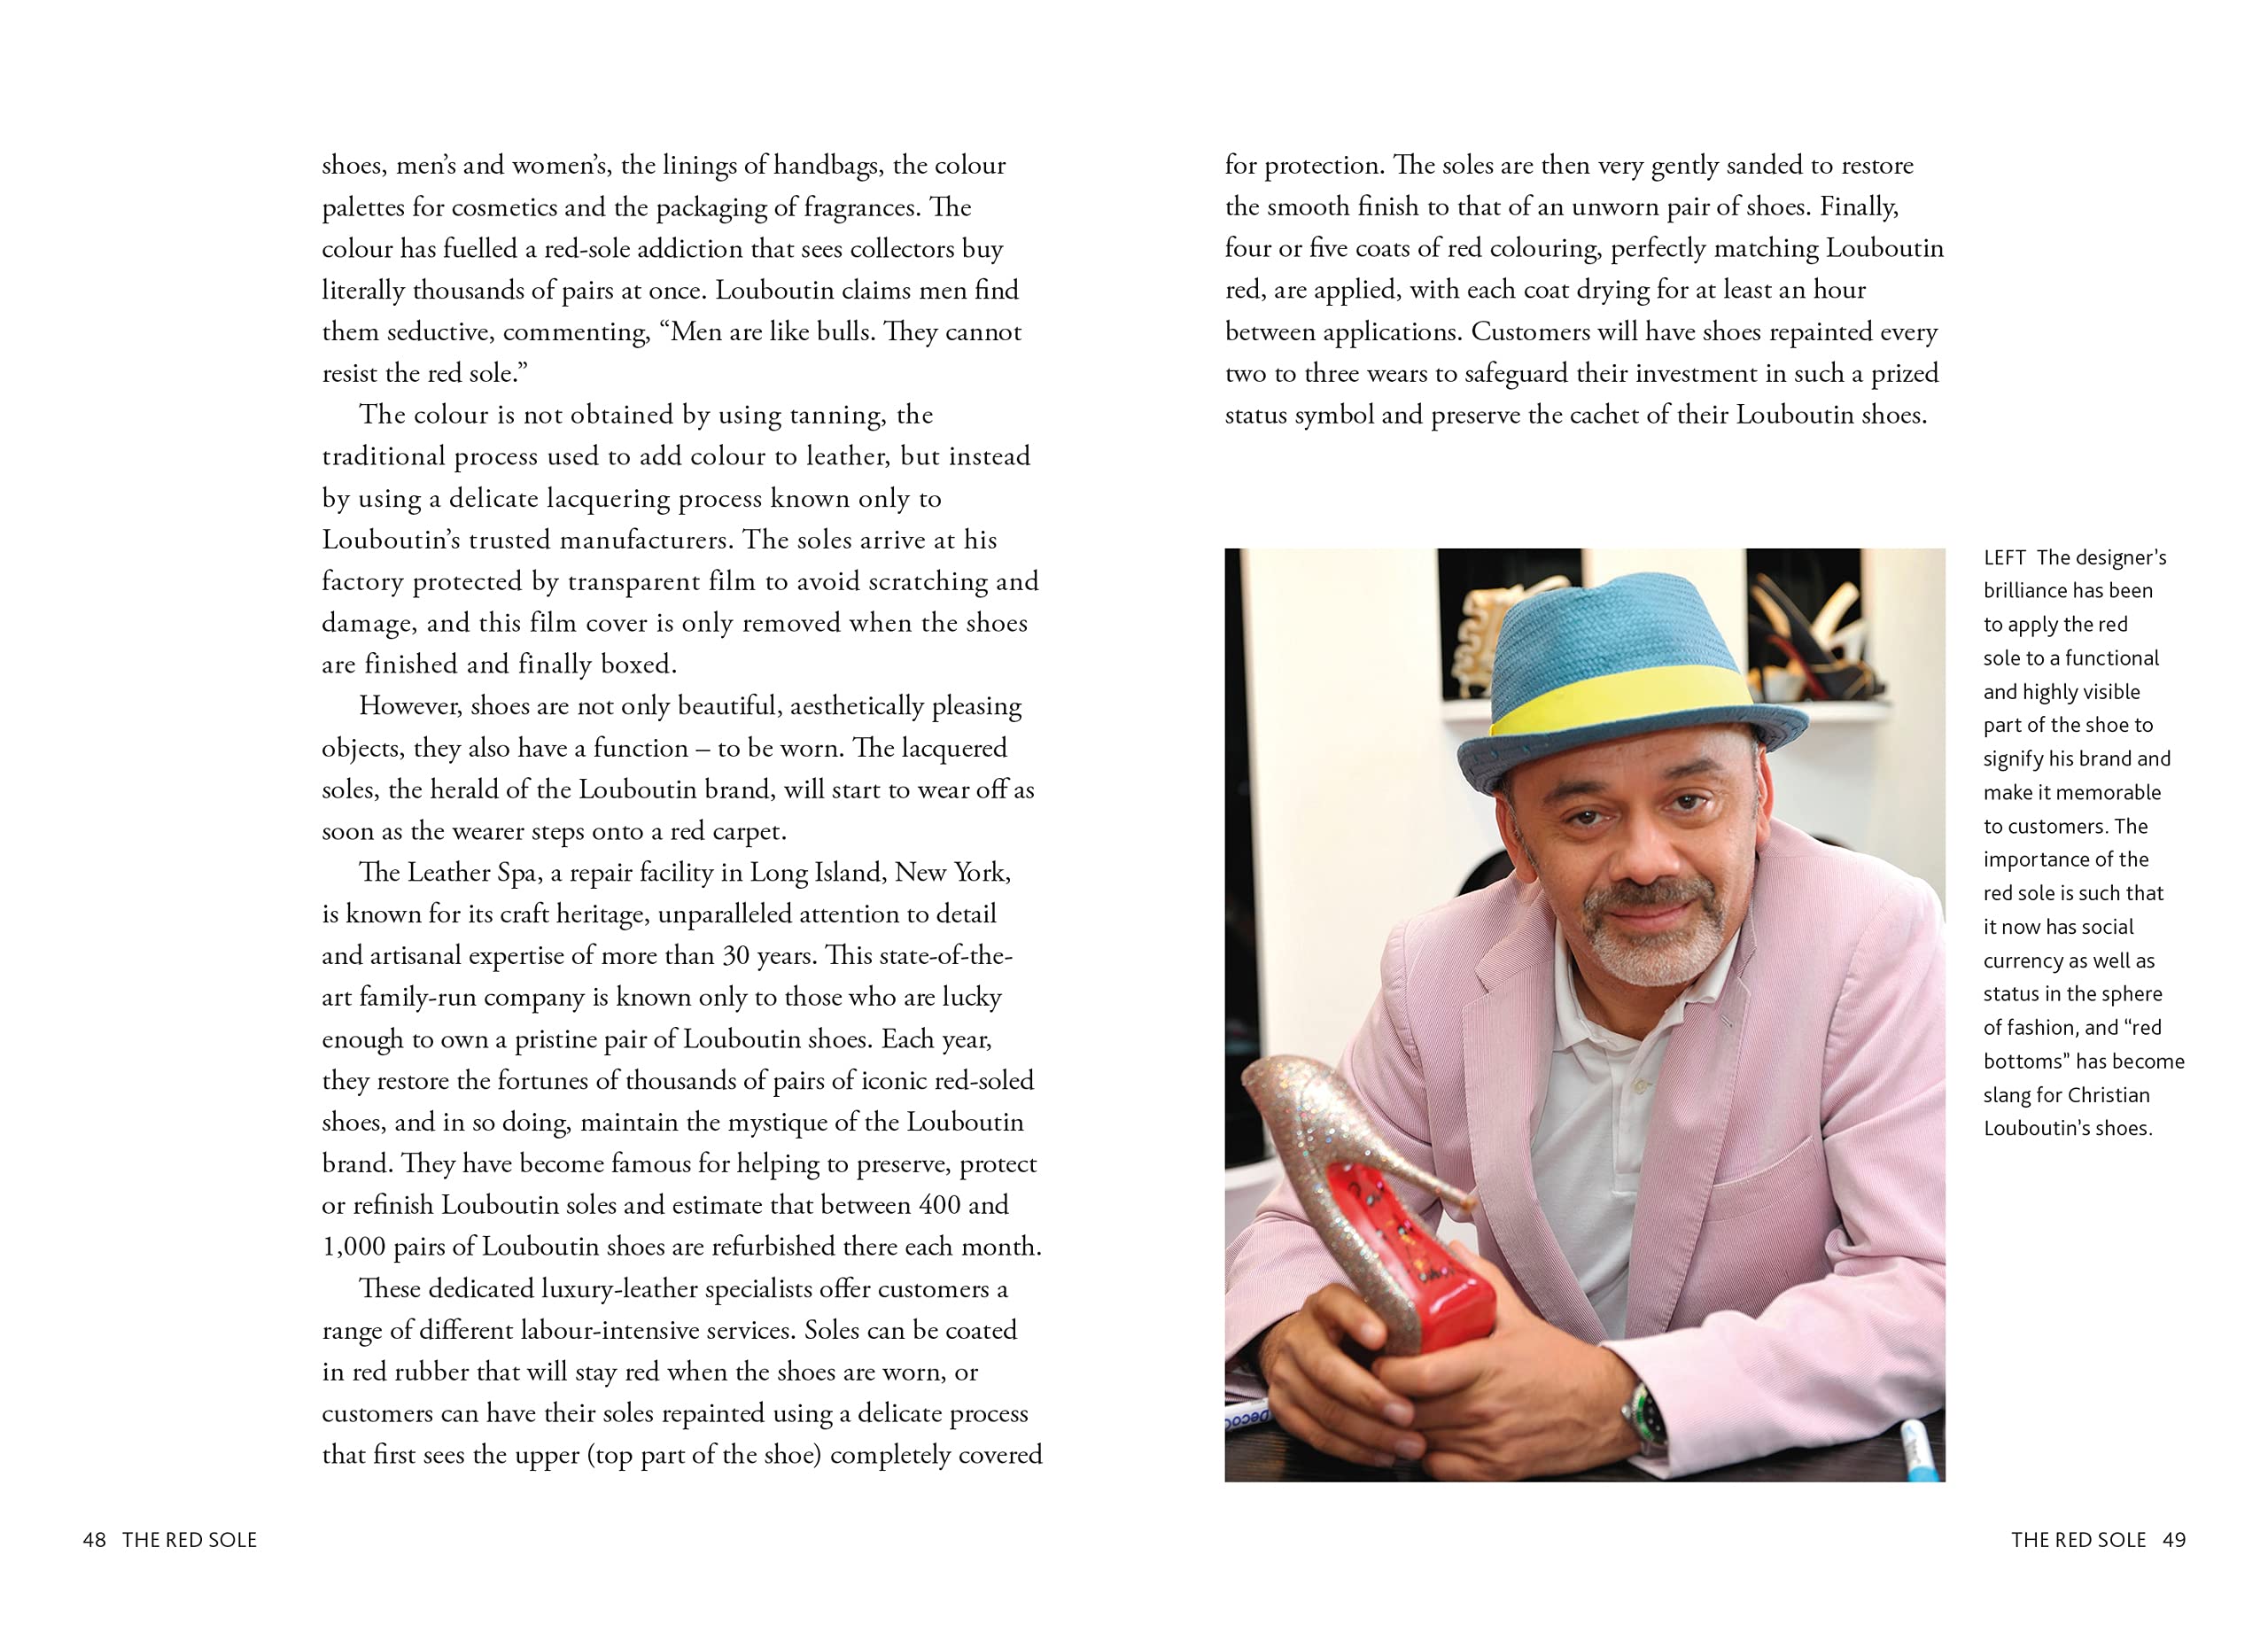 Little Book of Christian Louboutin: The Story of the Iconic Shoe Designer (Little Books of Fashion, 10)